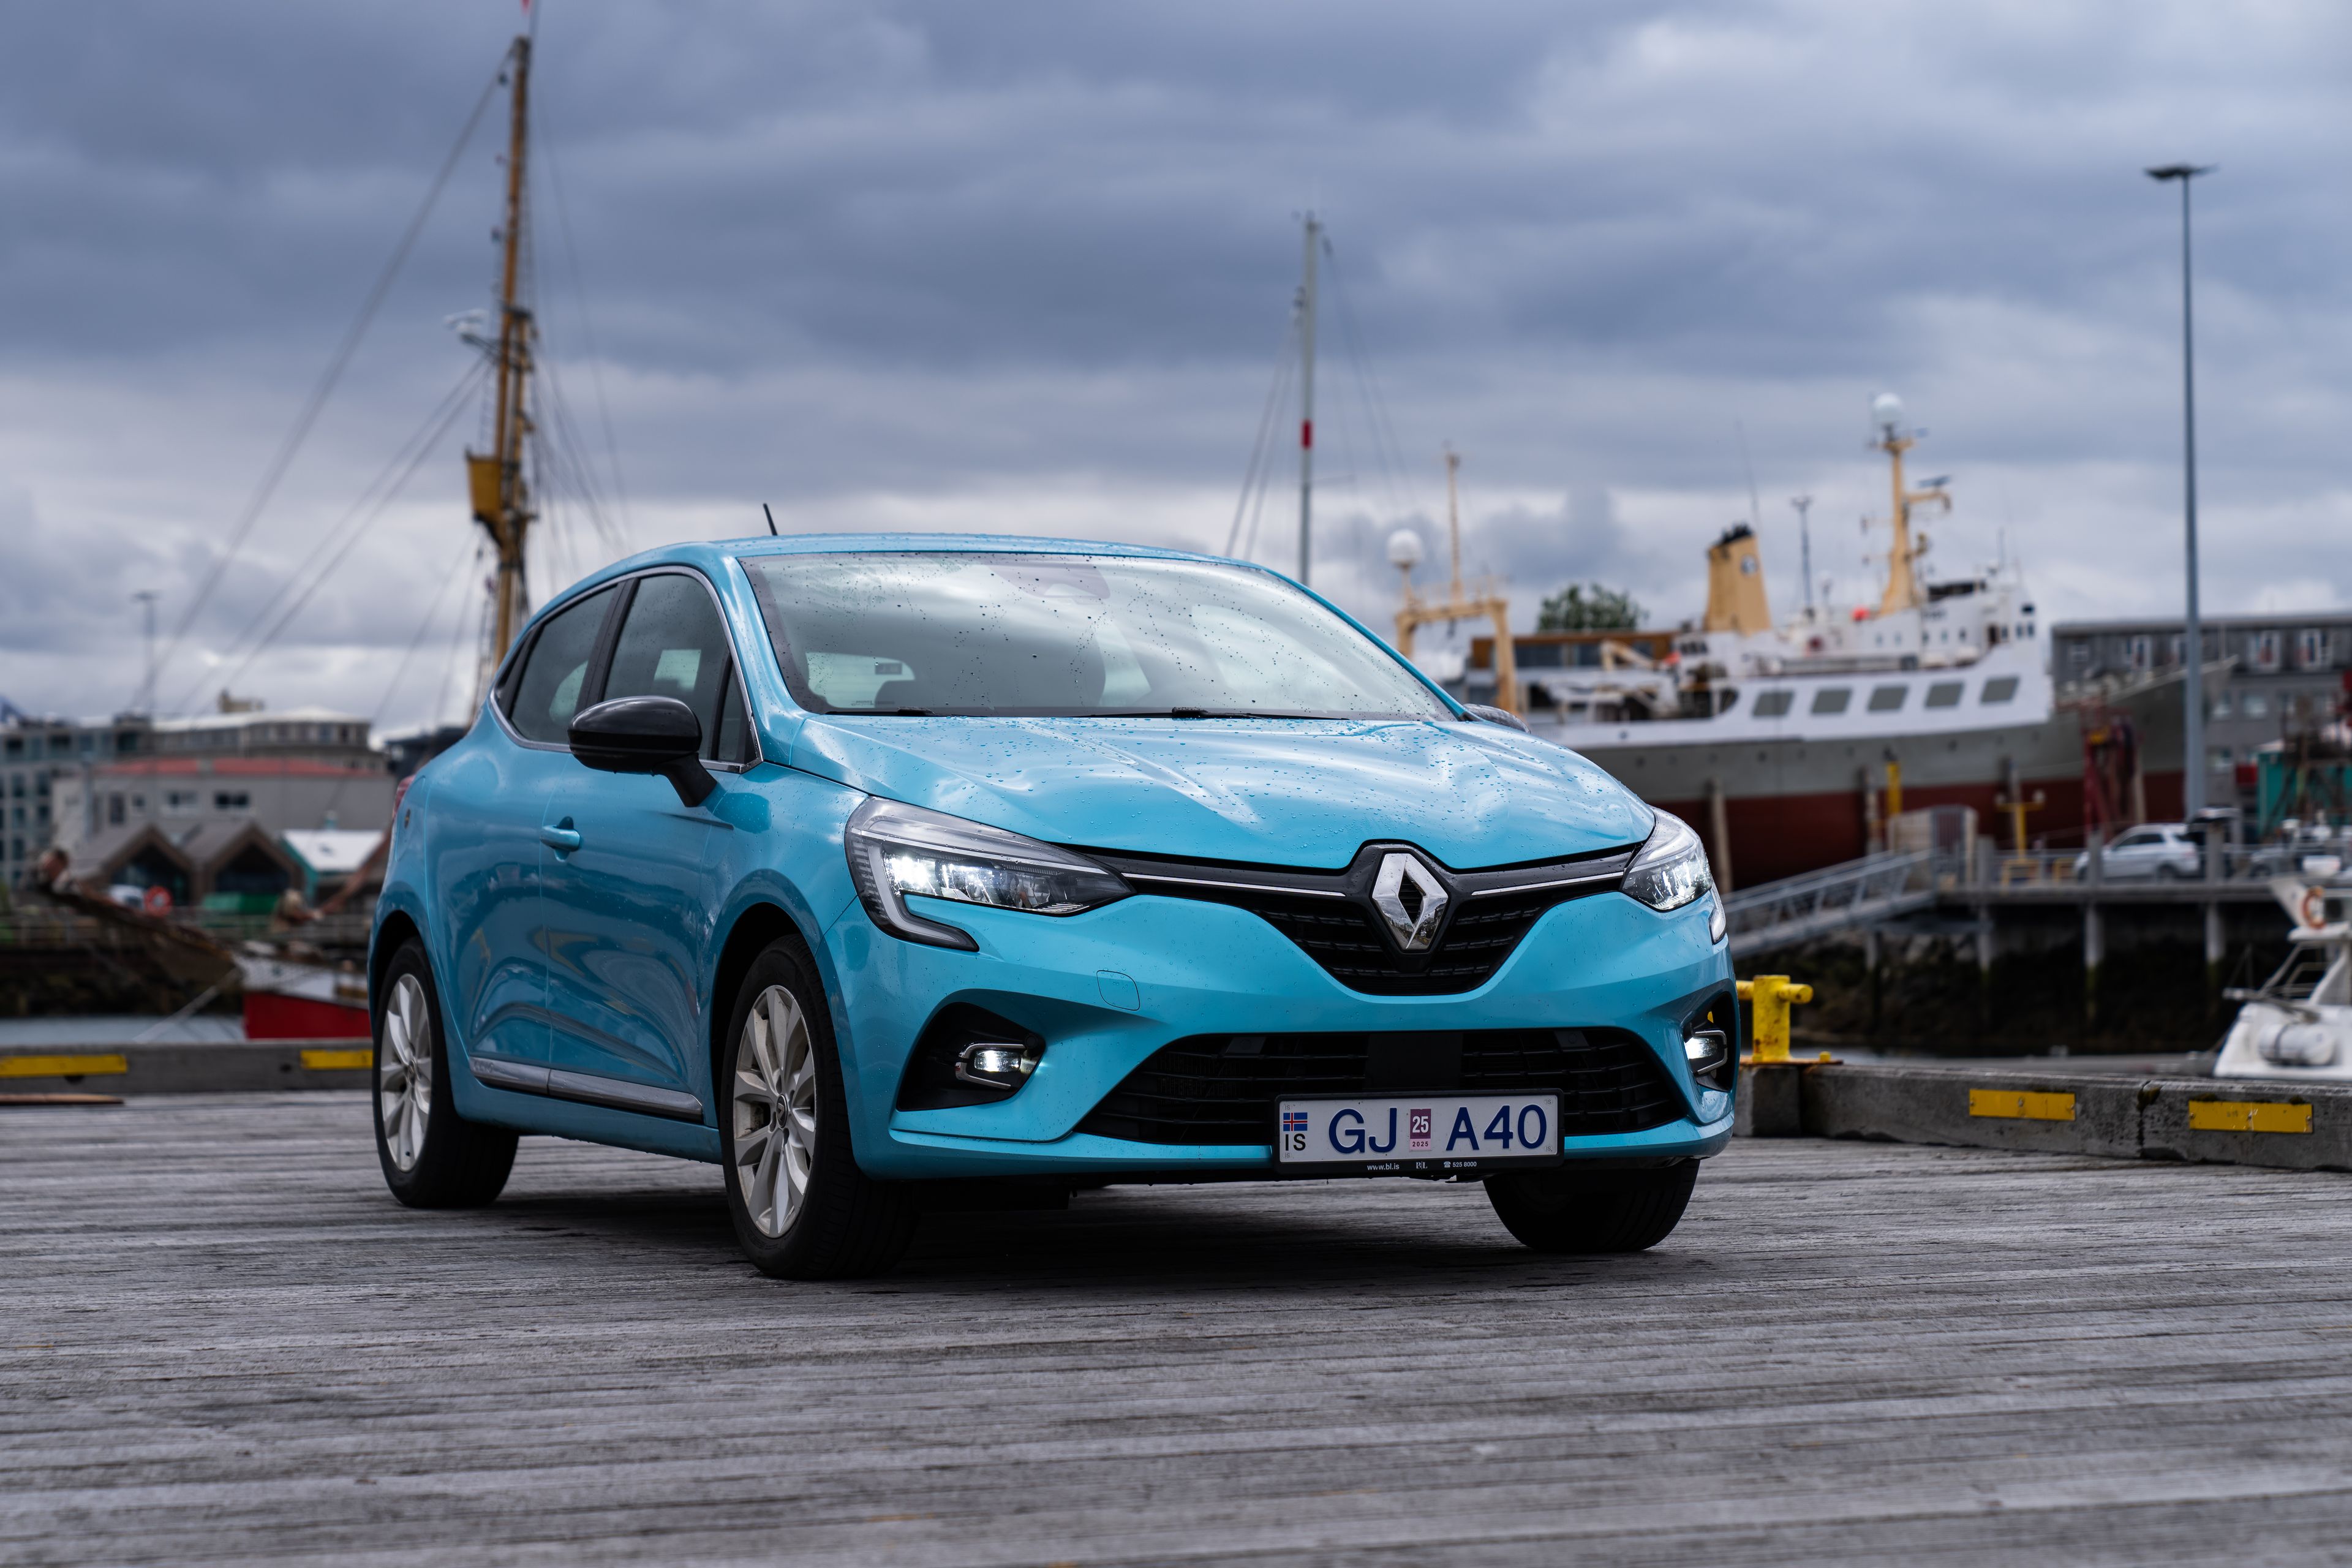 A blue Renault Clio iceland rental car parked in Iceland